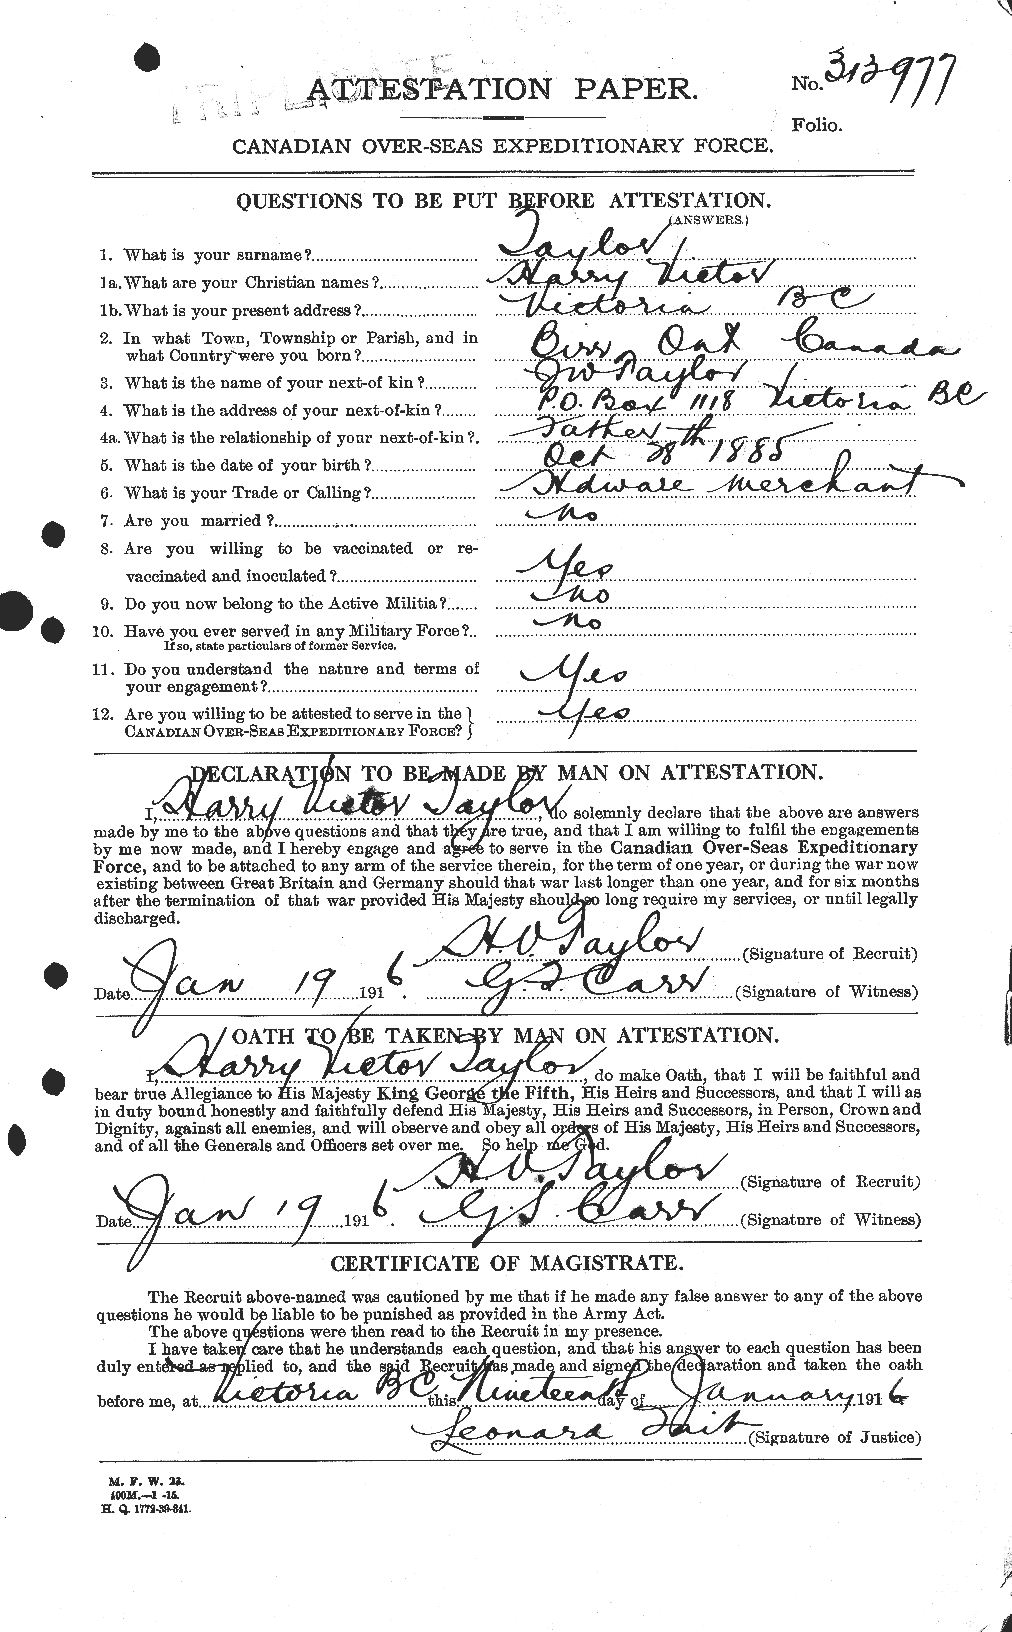 Personnel Records of the First World War - CEF 626505a